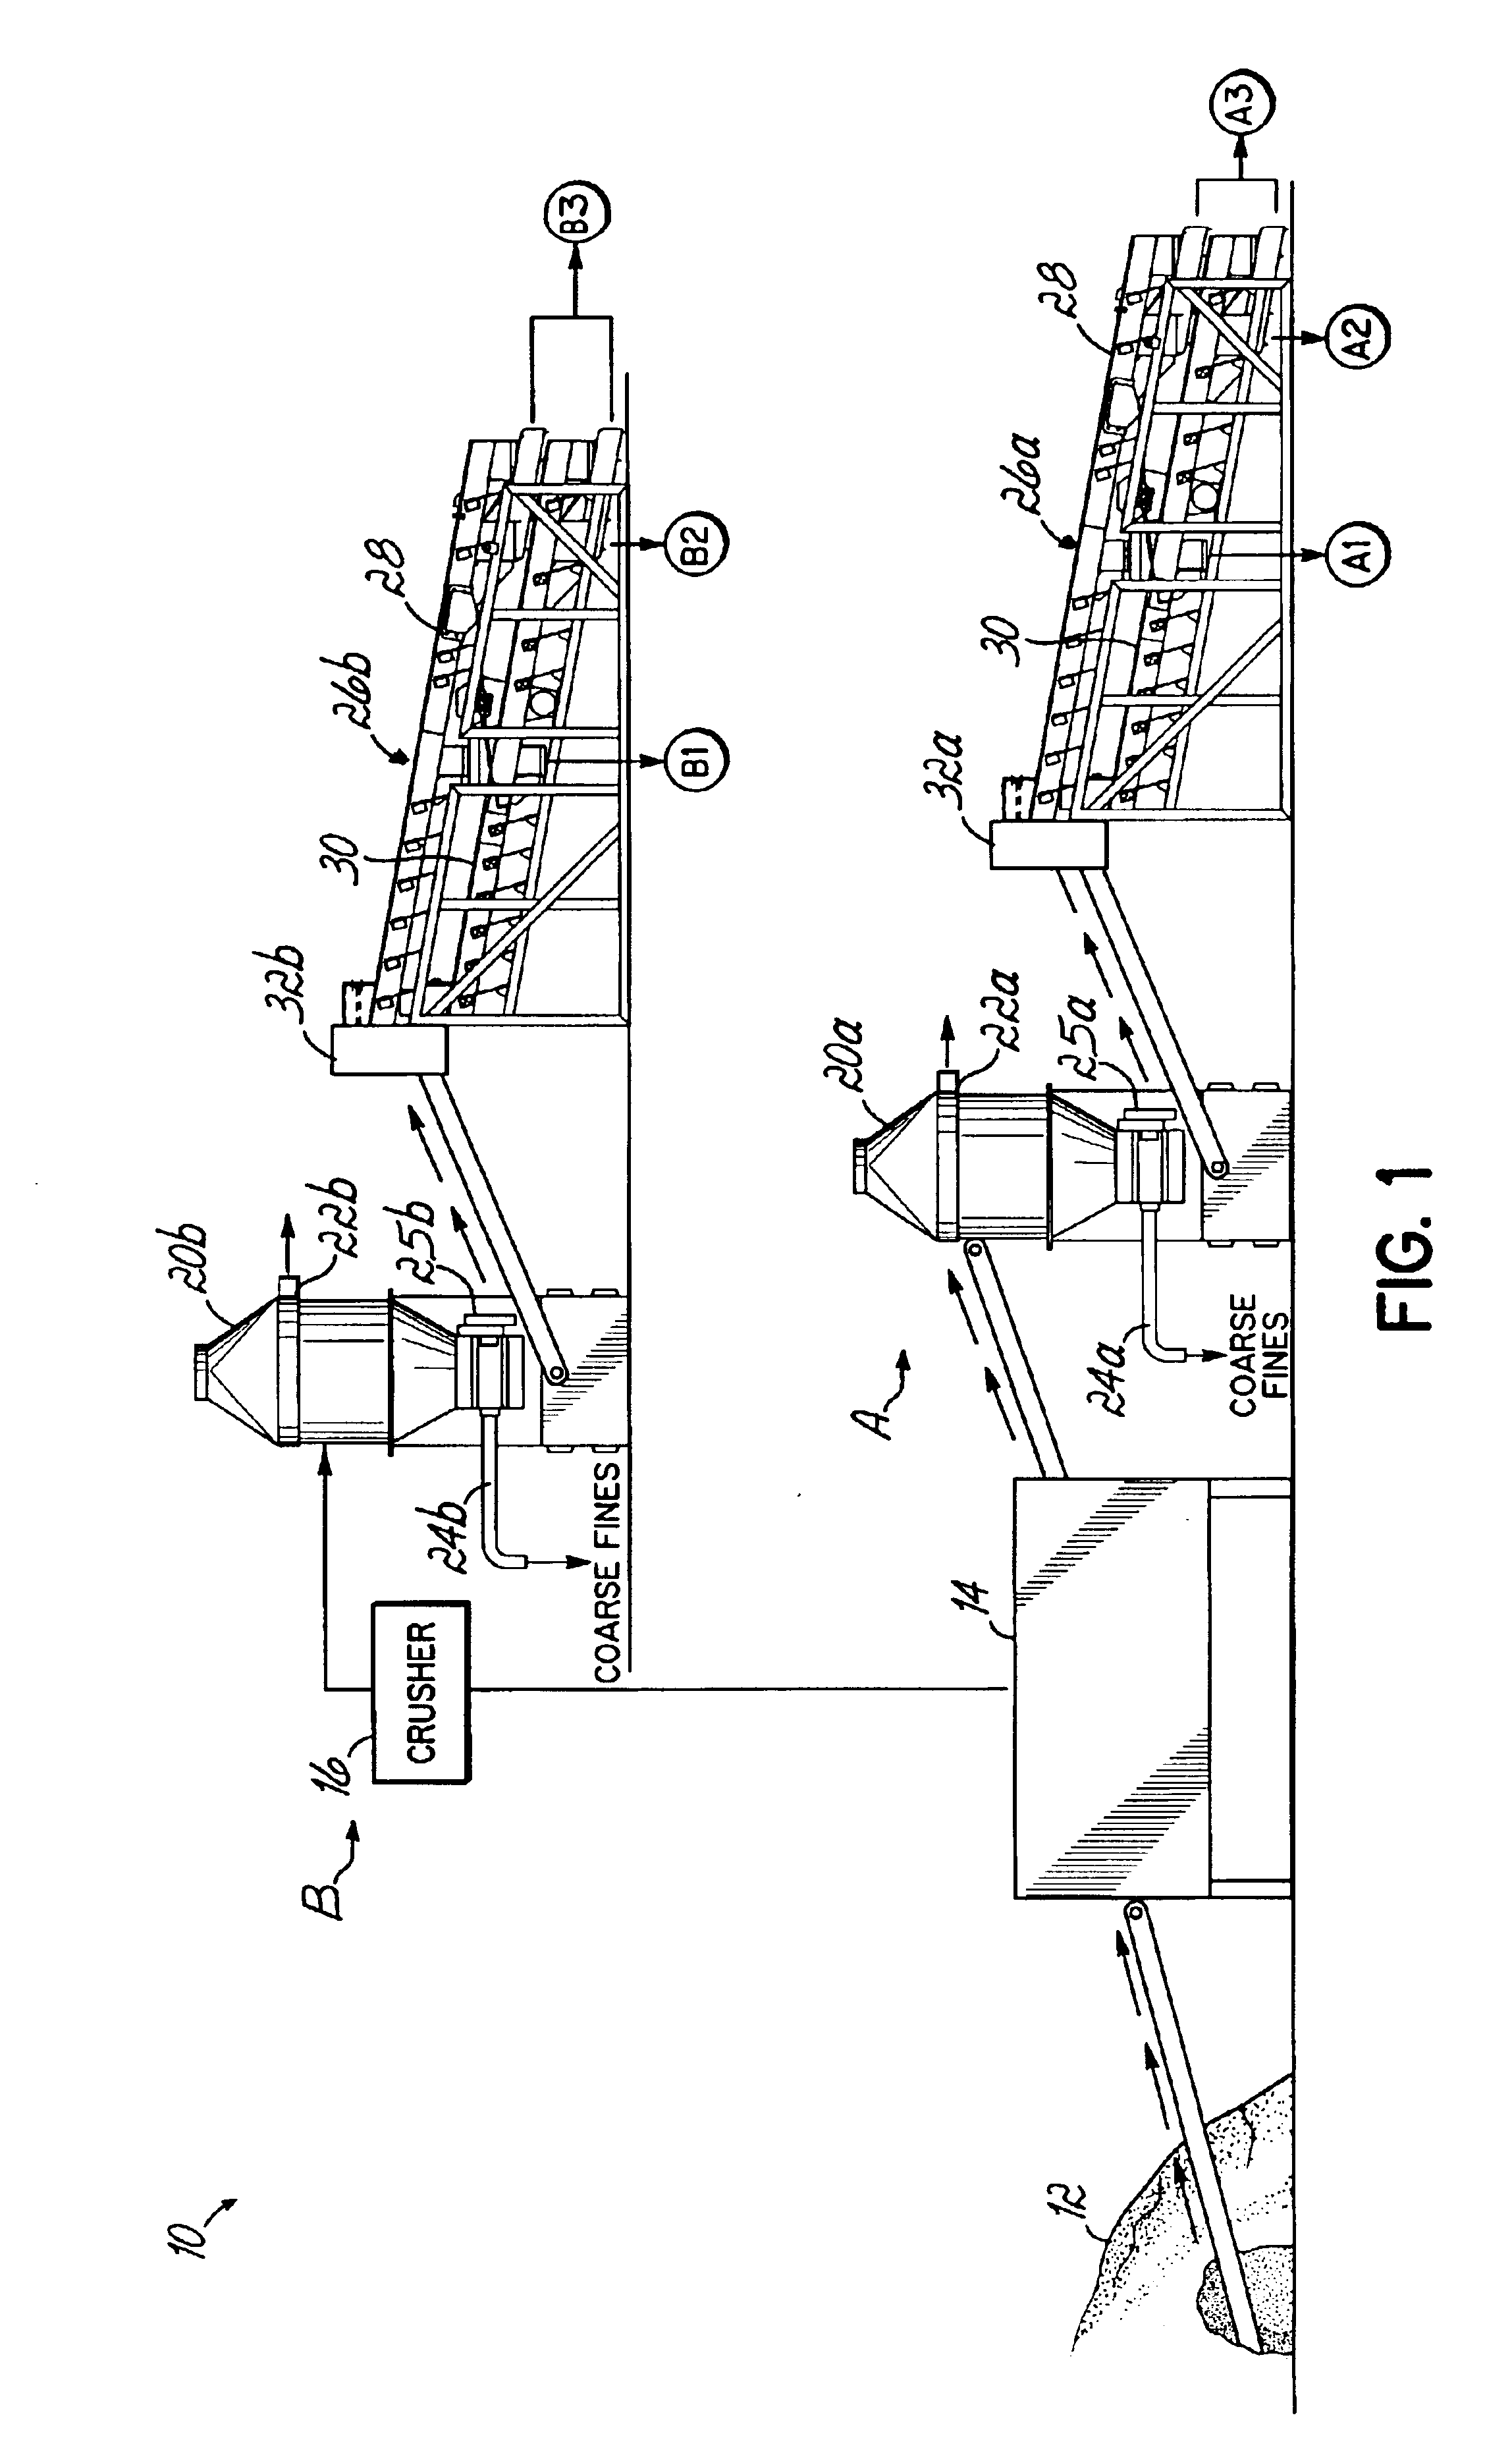 Apparatus and method for dry beneficiation of coal